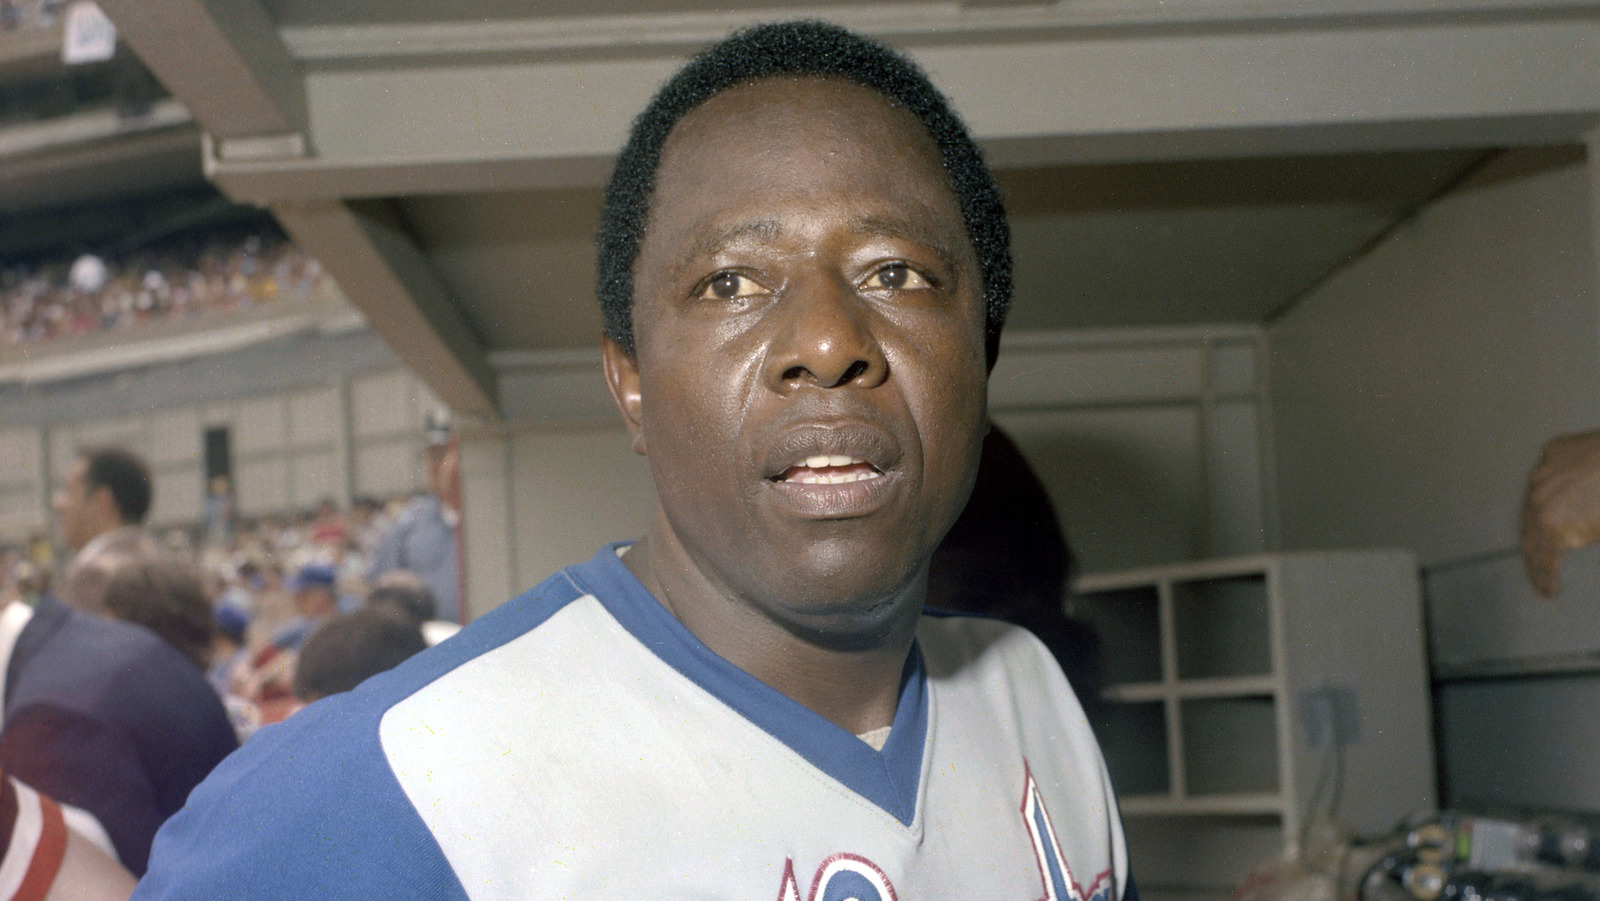 Hank Aaron of the Atlanta Braves is interviewed at Fulton County